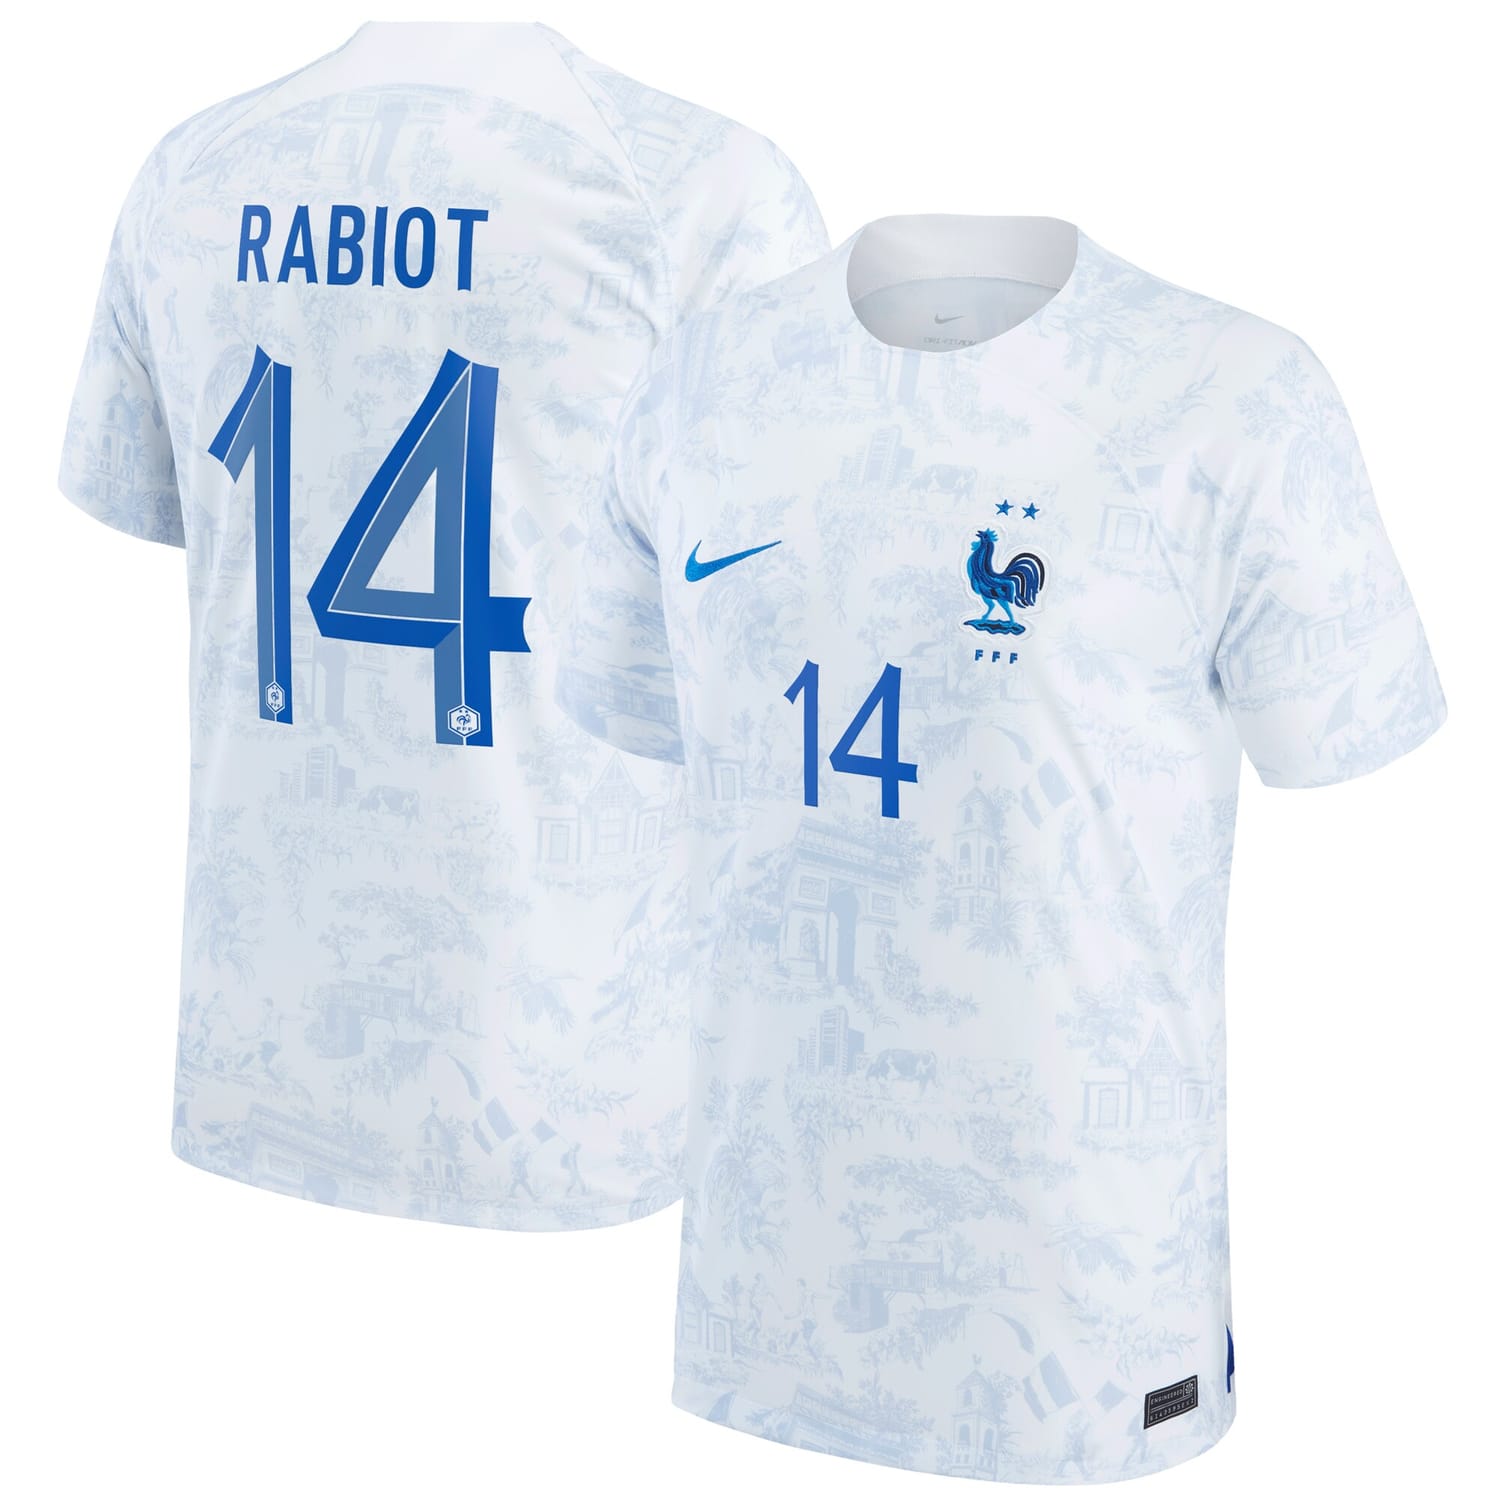 France National Team Away Jersey Shirt 2022 player Adrien Rabiot 14 printing for Men